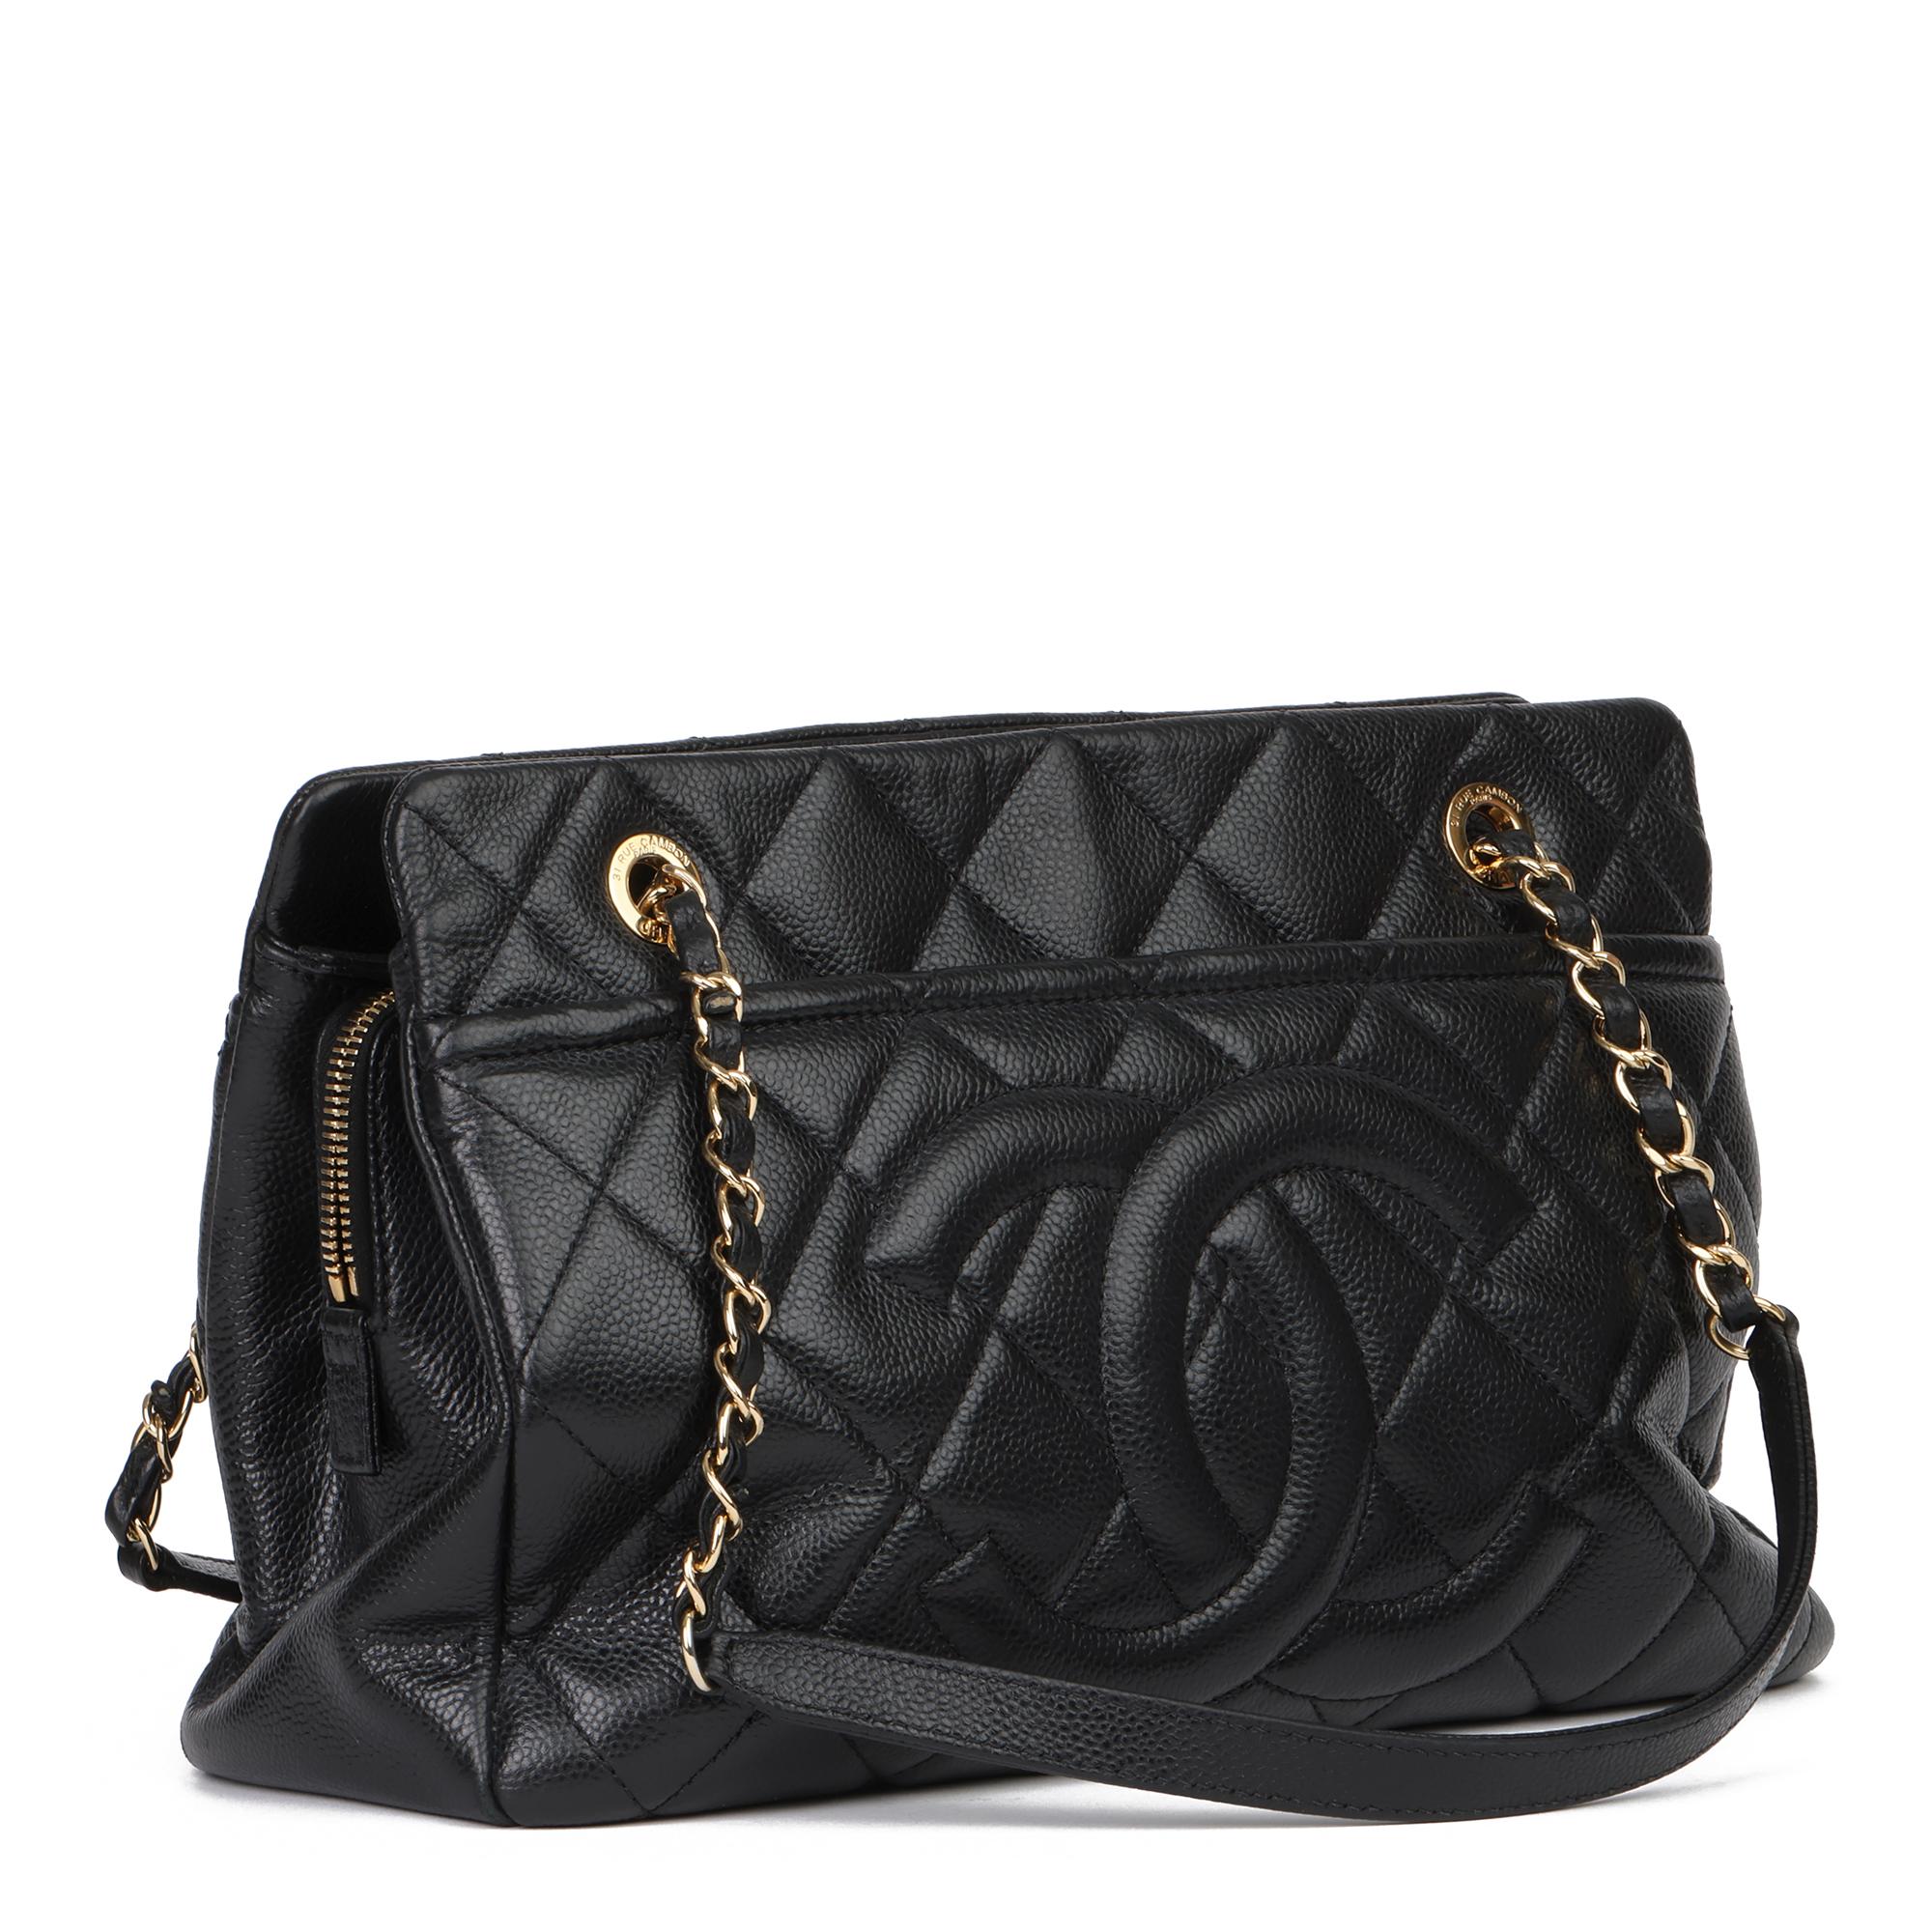 CHANEL
Black Quilted Caviar Leather Petite Shopping Tote PST

Xupes Reference: CB357
Serial Number: 17747113
Age (Circa): 2013
Accompanied By: Chanel Dust Bag, Authenticity Card, Care Booklet
Authenticity Details: Authenticity Card, Serial Sticker